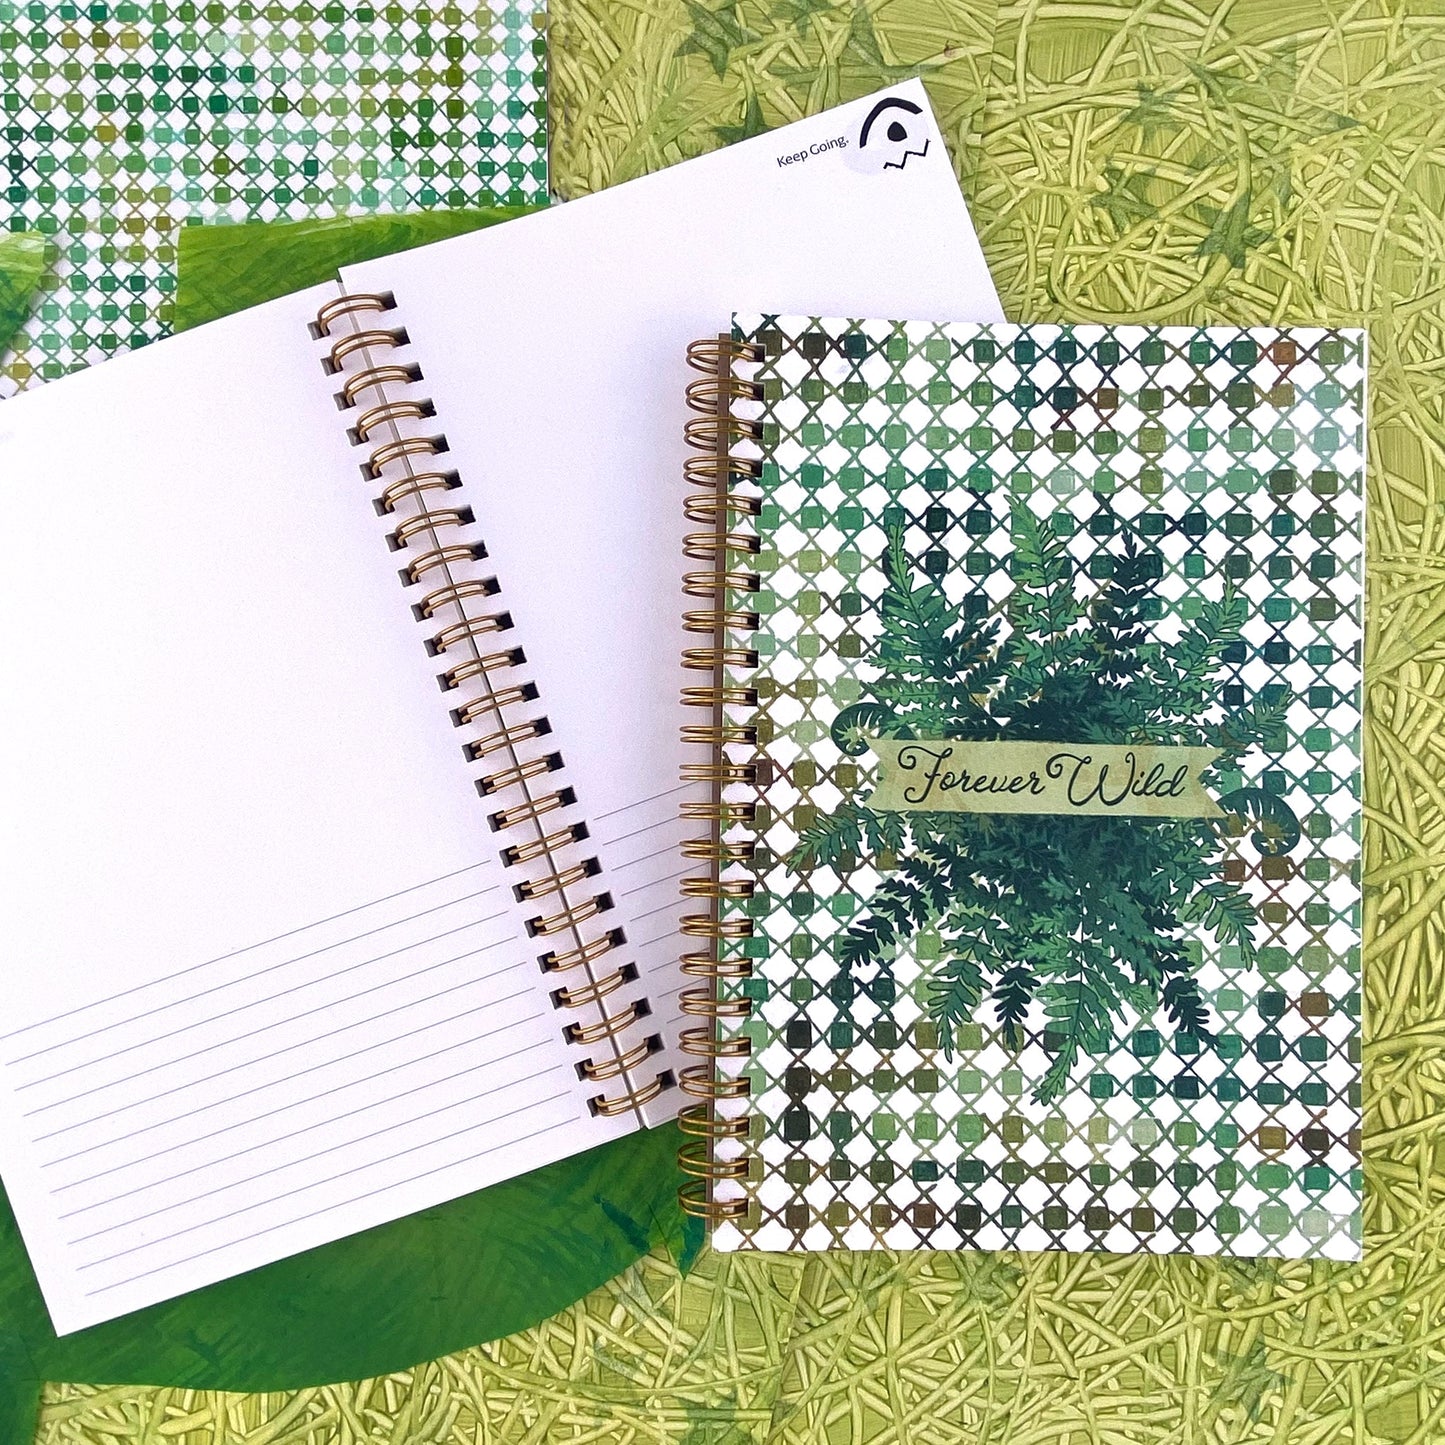 Spiral Bound notebook with a handpainted checkered cover , a grouping of ferns in the center with a banner that says Forever Wild in a hand drawn script font. Very outdoorsy. Using all the green colors. Handpainted green background with swirly textures.